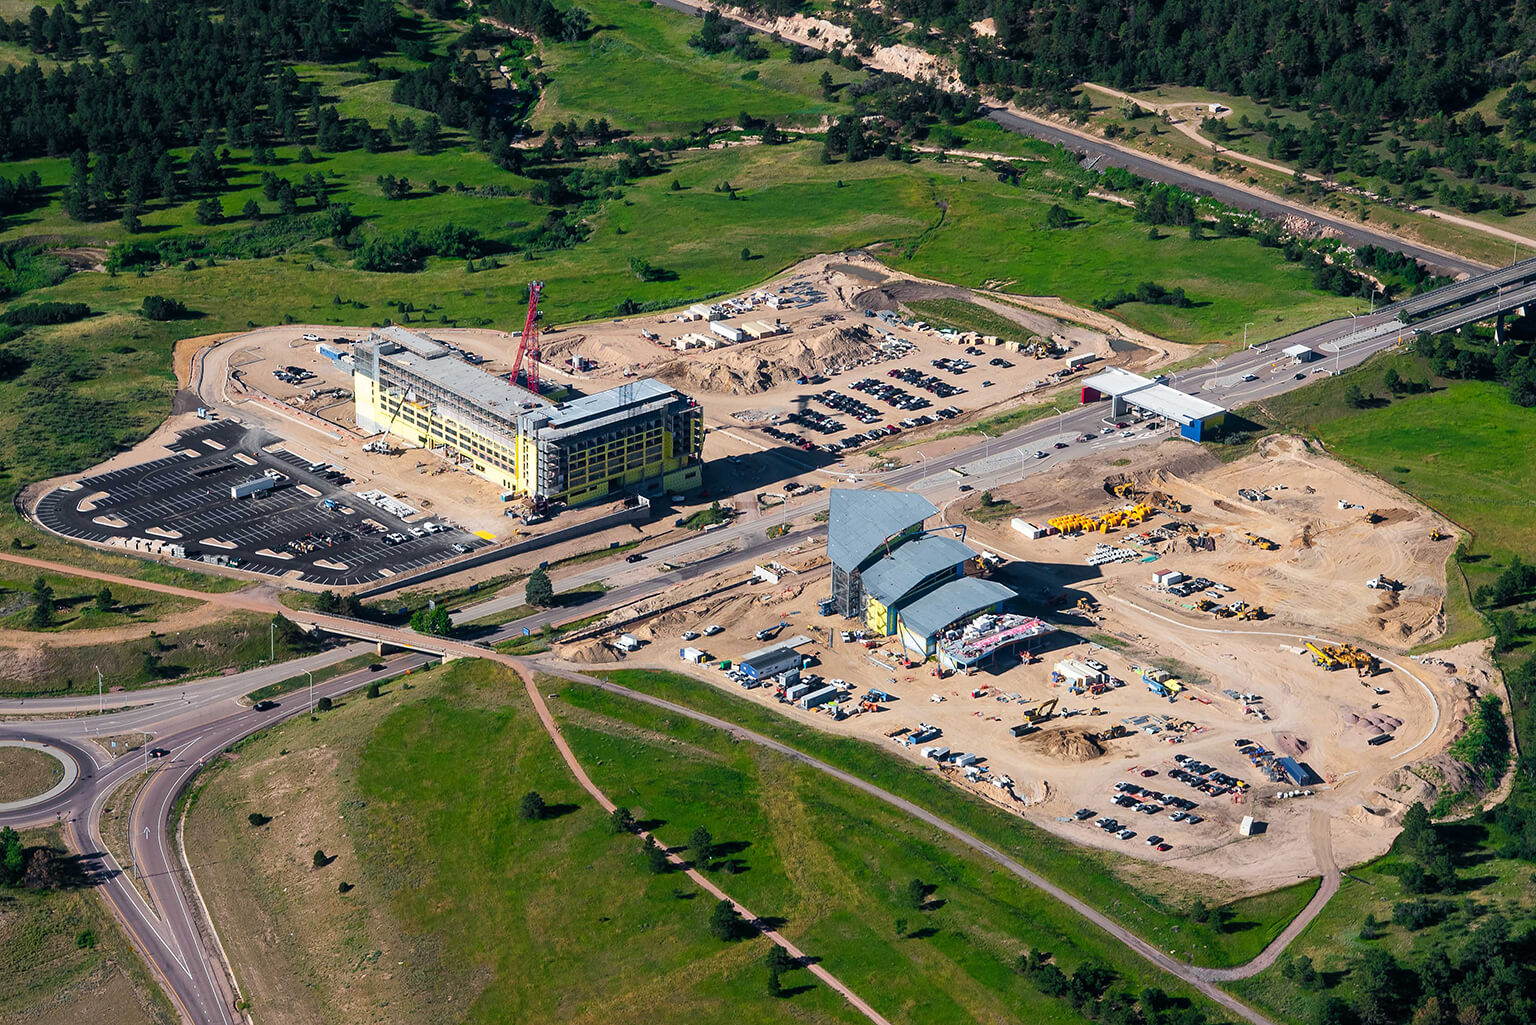 Aerial view of new visitor center and hotel